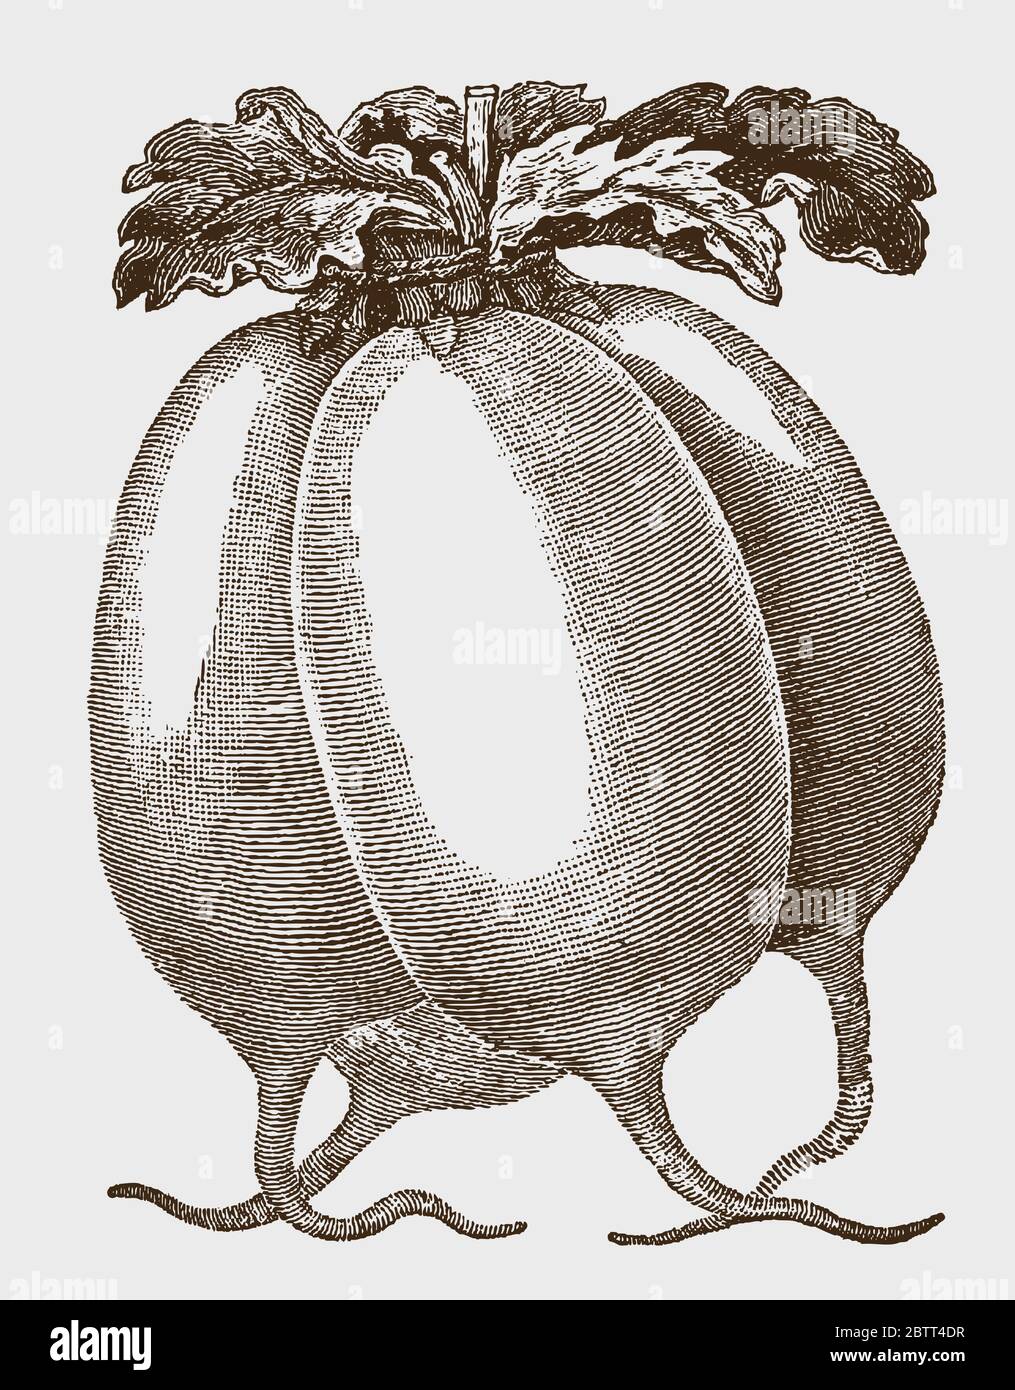 Bundle of four white, cylindrical radishes, after a historical engraving from the early 20th century Stock Vector